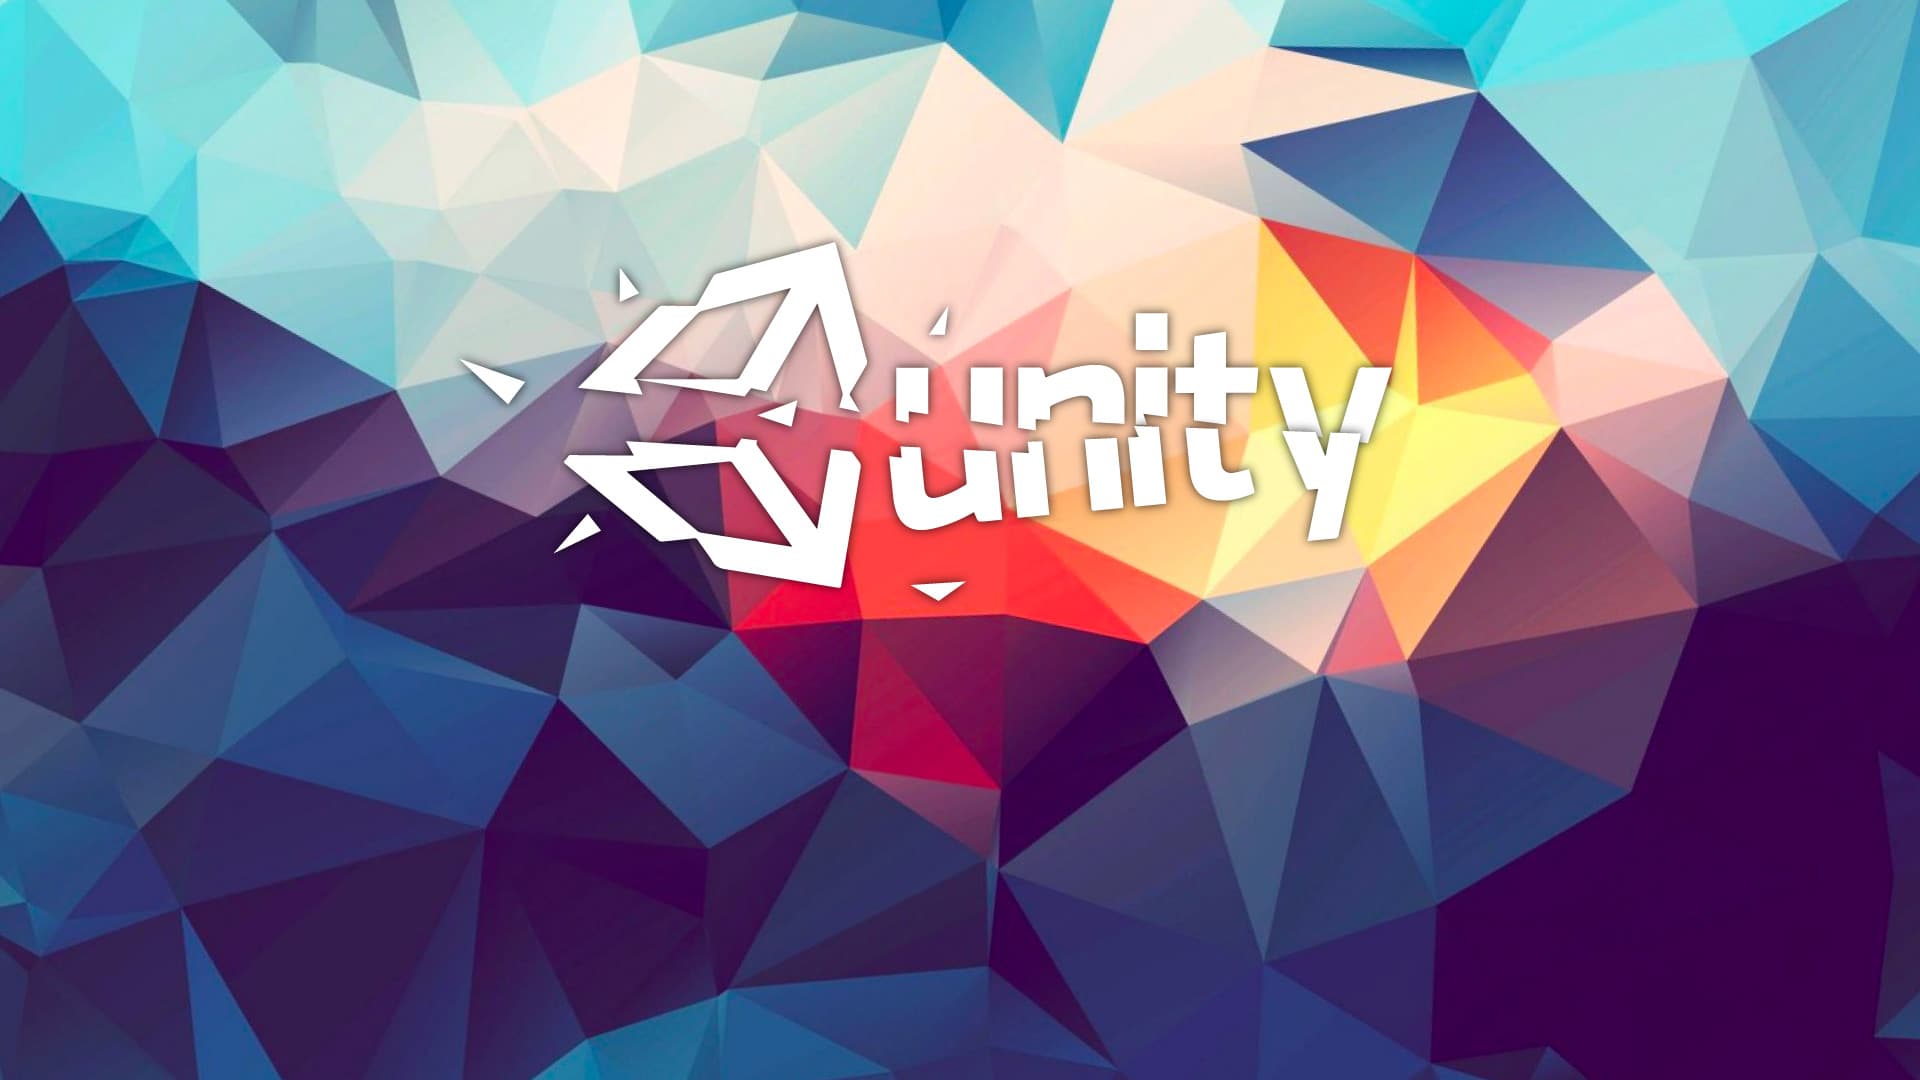 unity-fractured-2 (1)